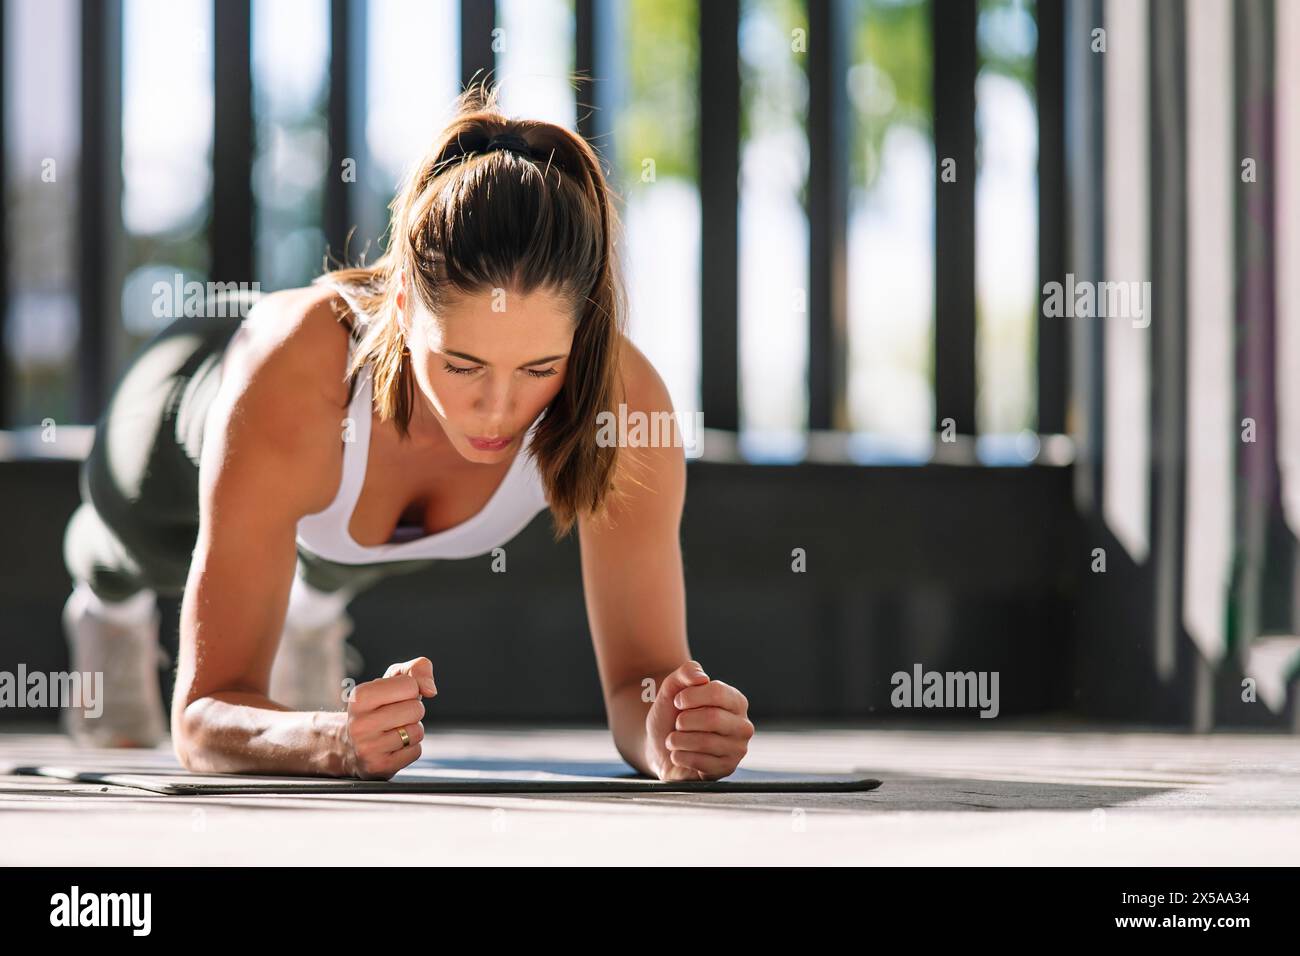 A focused athletic woman performing a plank exercise in her home environment, showcasing determination and fitness discipline Stock Photo